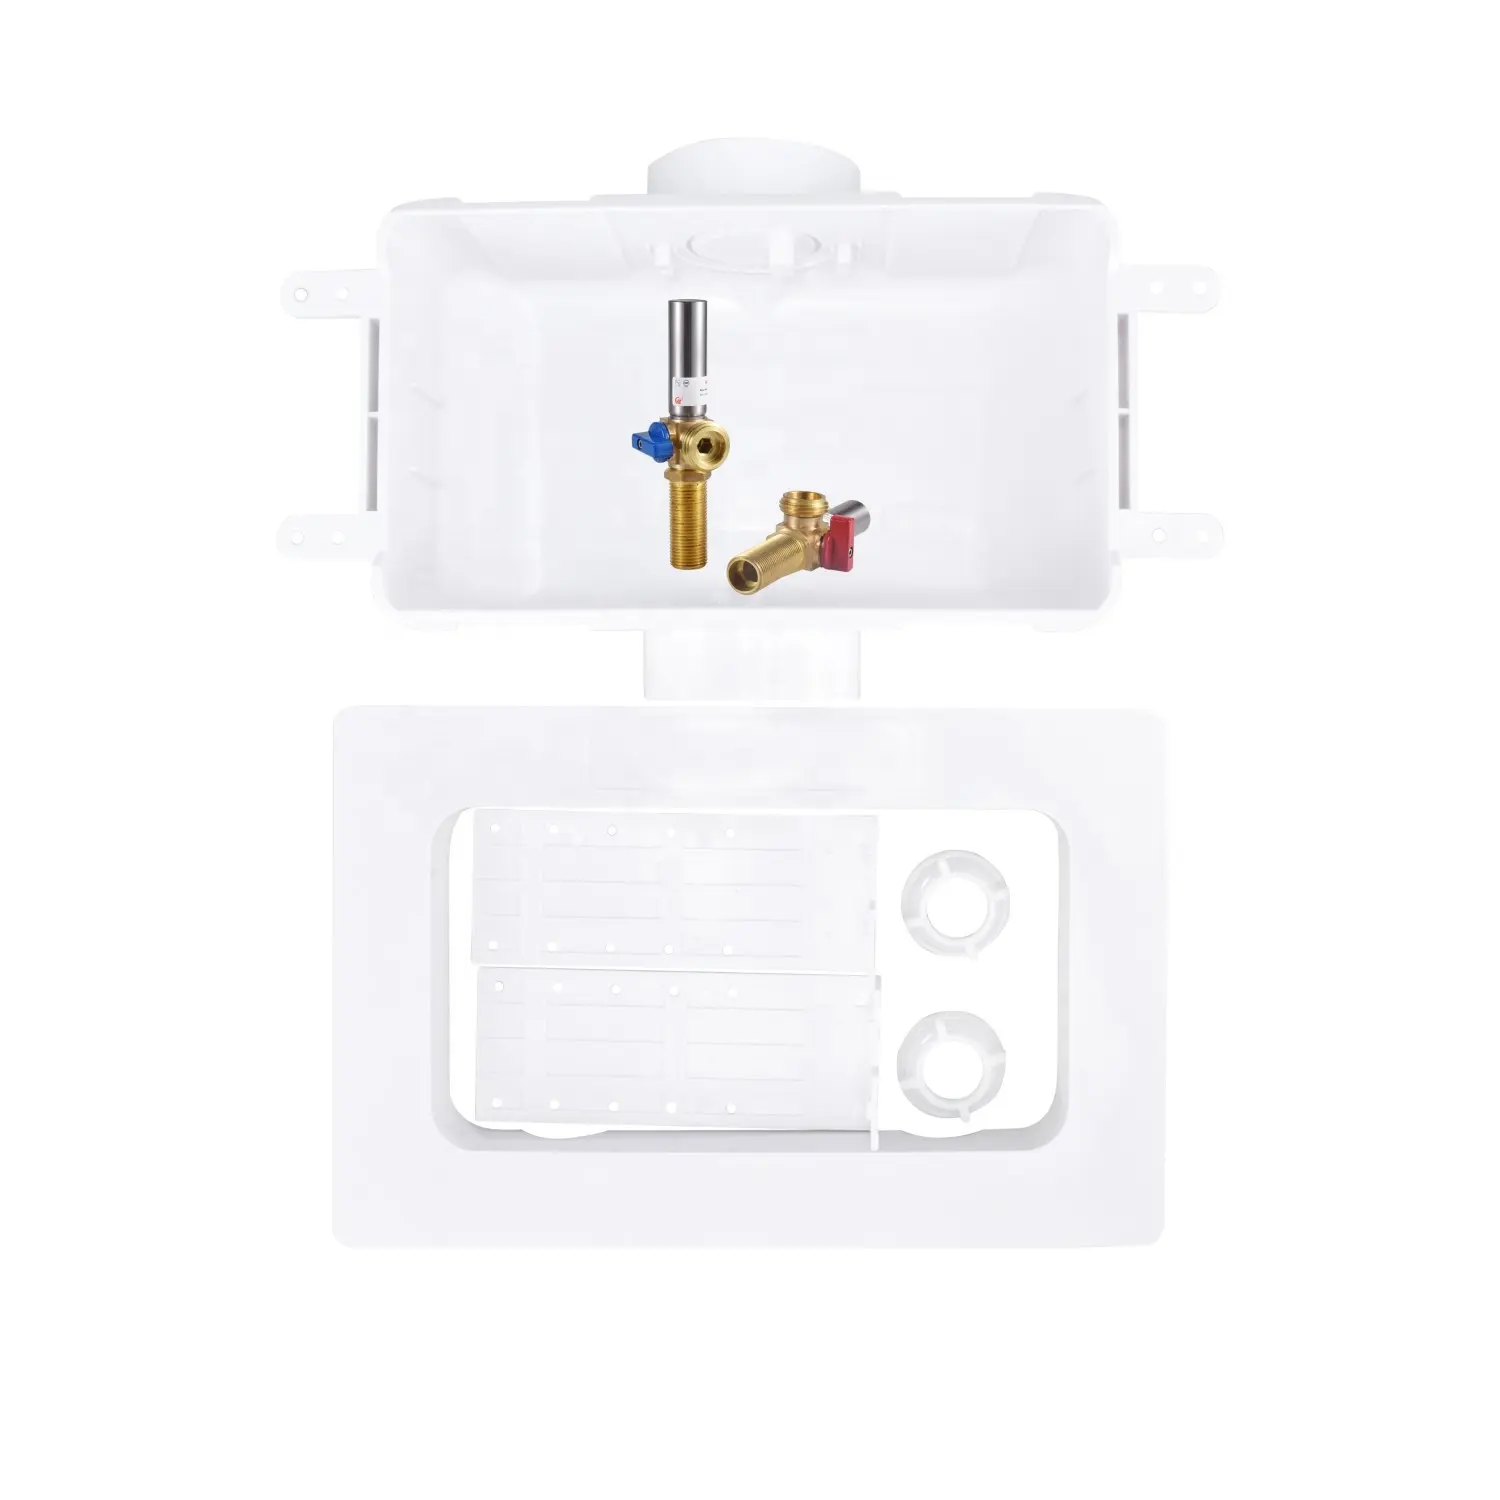 Flat Washing Machine Outlet Box with Valves with SS Arrester half inch MIP x 3 quarters inch MHT